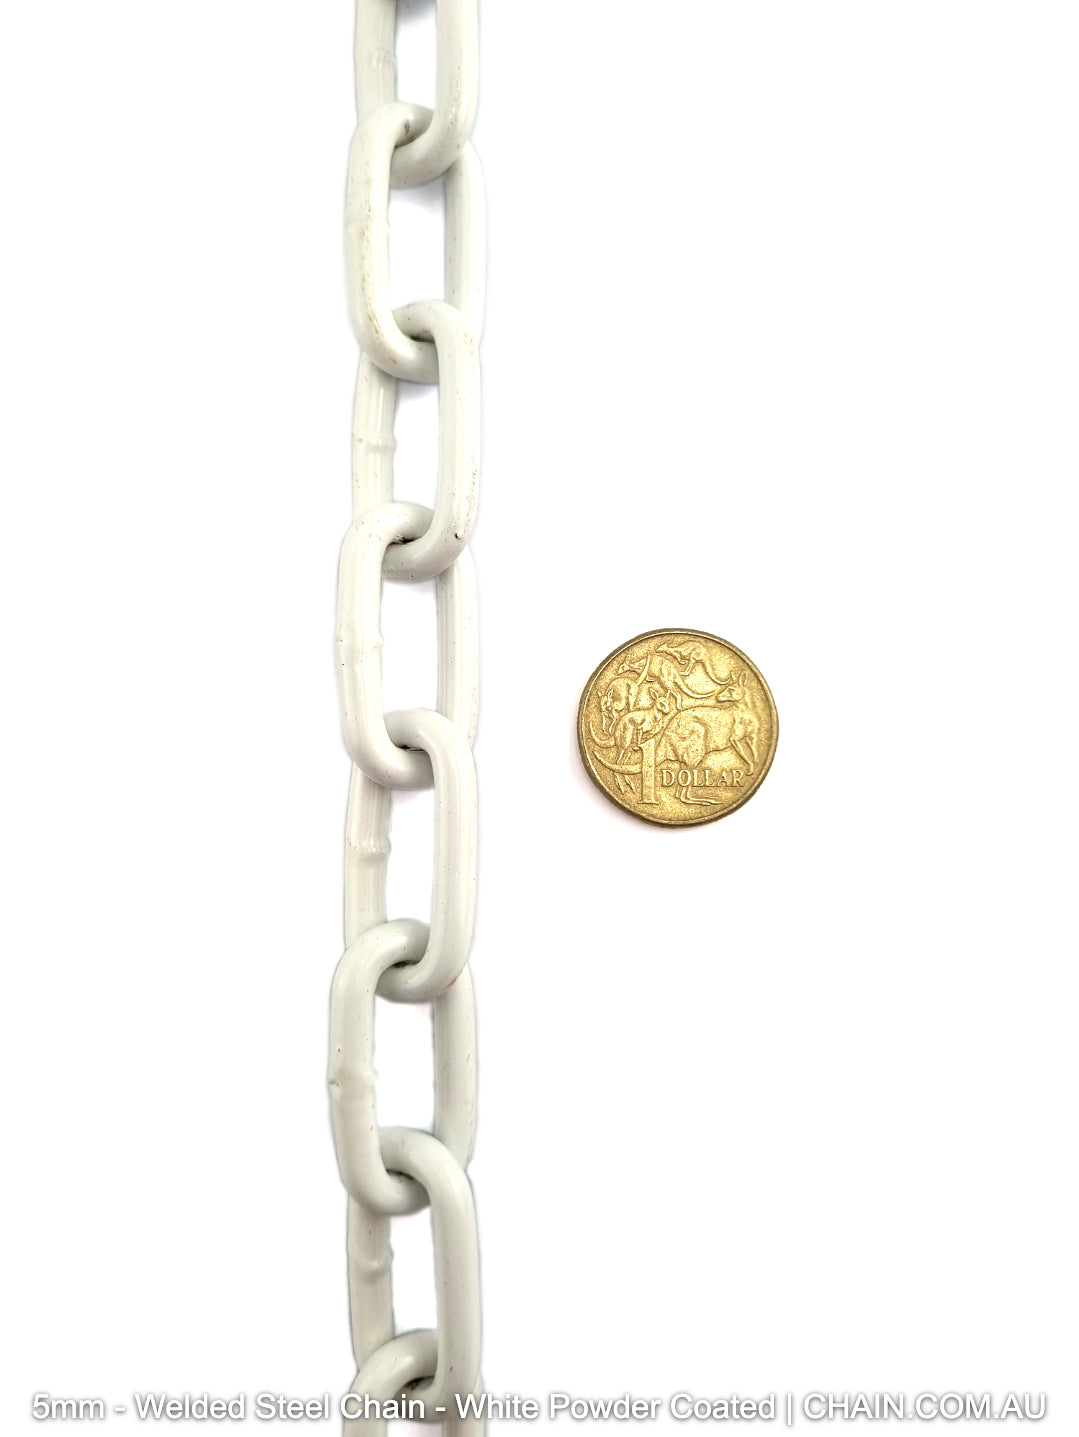 Welded Steel Chain - White Powder Coated. Size: 5mm. Chain by the metre or bulk buy 25kg buckets. Shipping Australia wide. Shop online chain.com.au